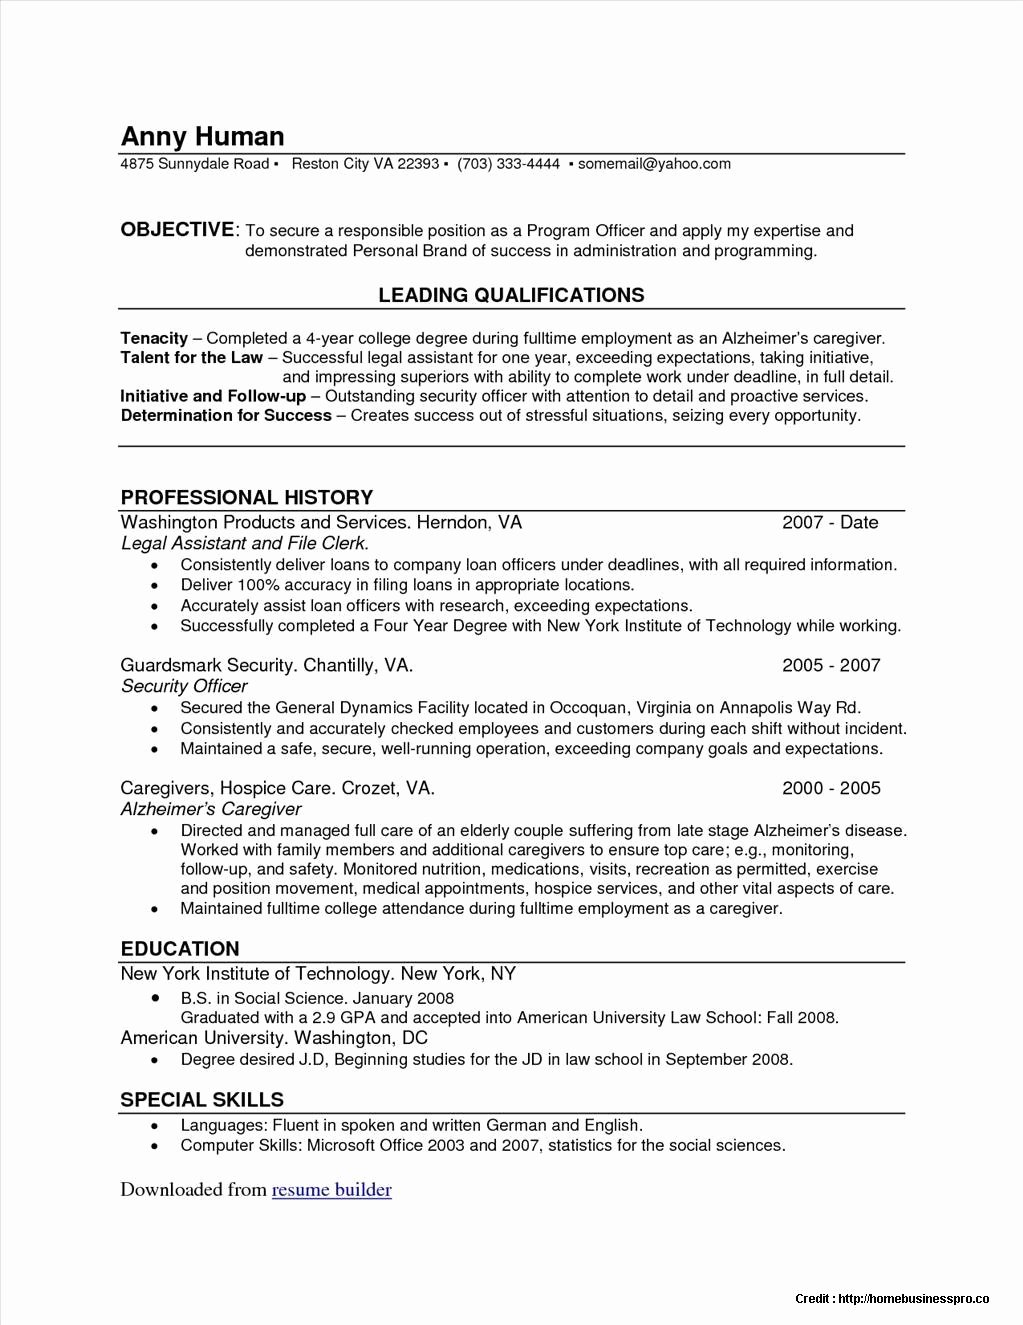 Totally Free Resume Builder and Download Resume Resume